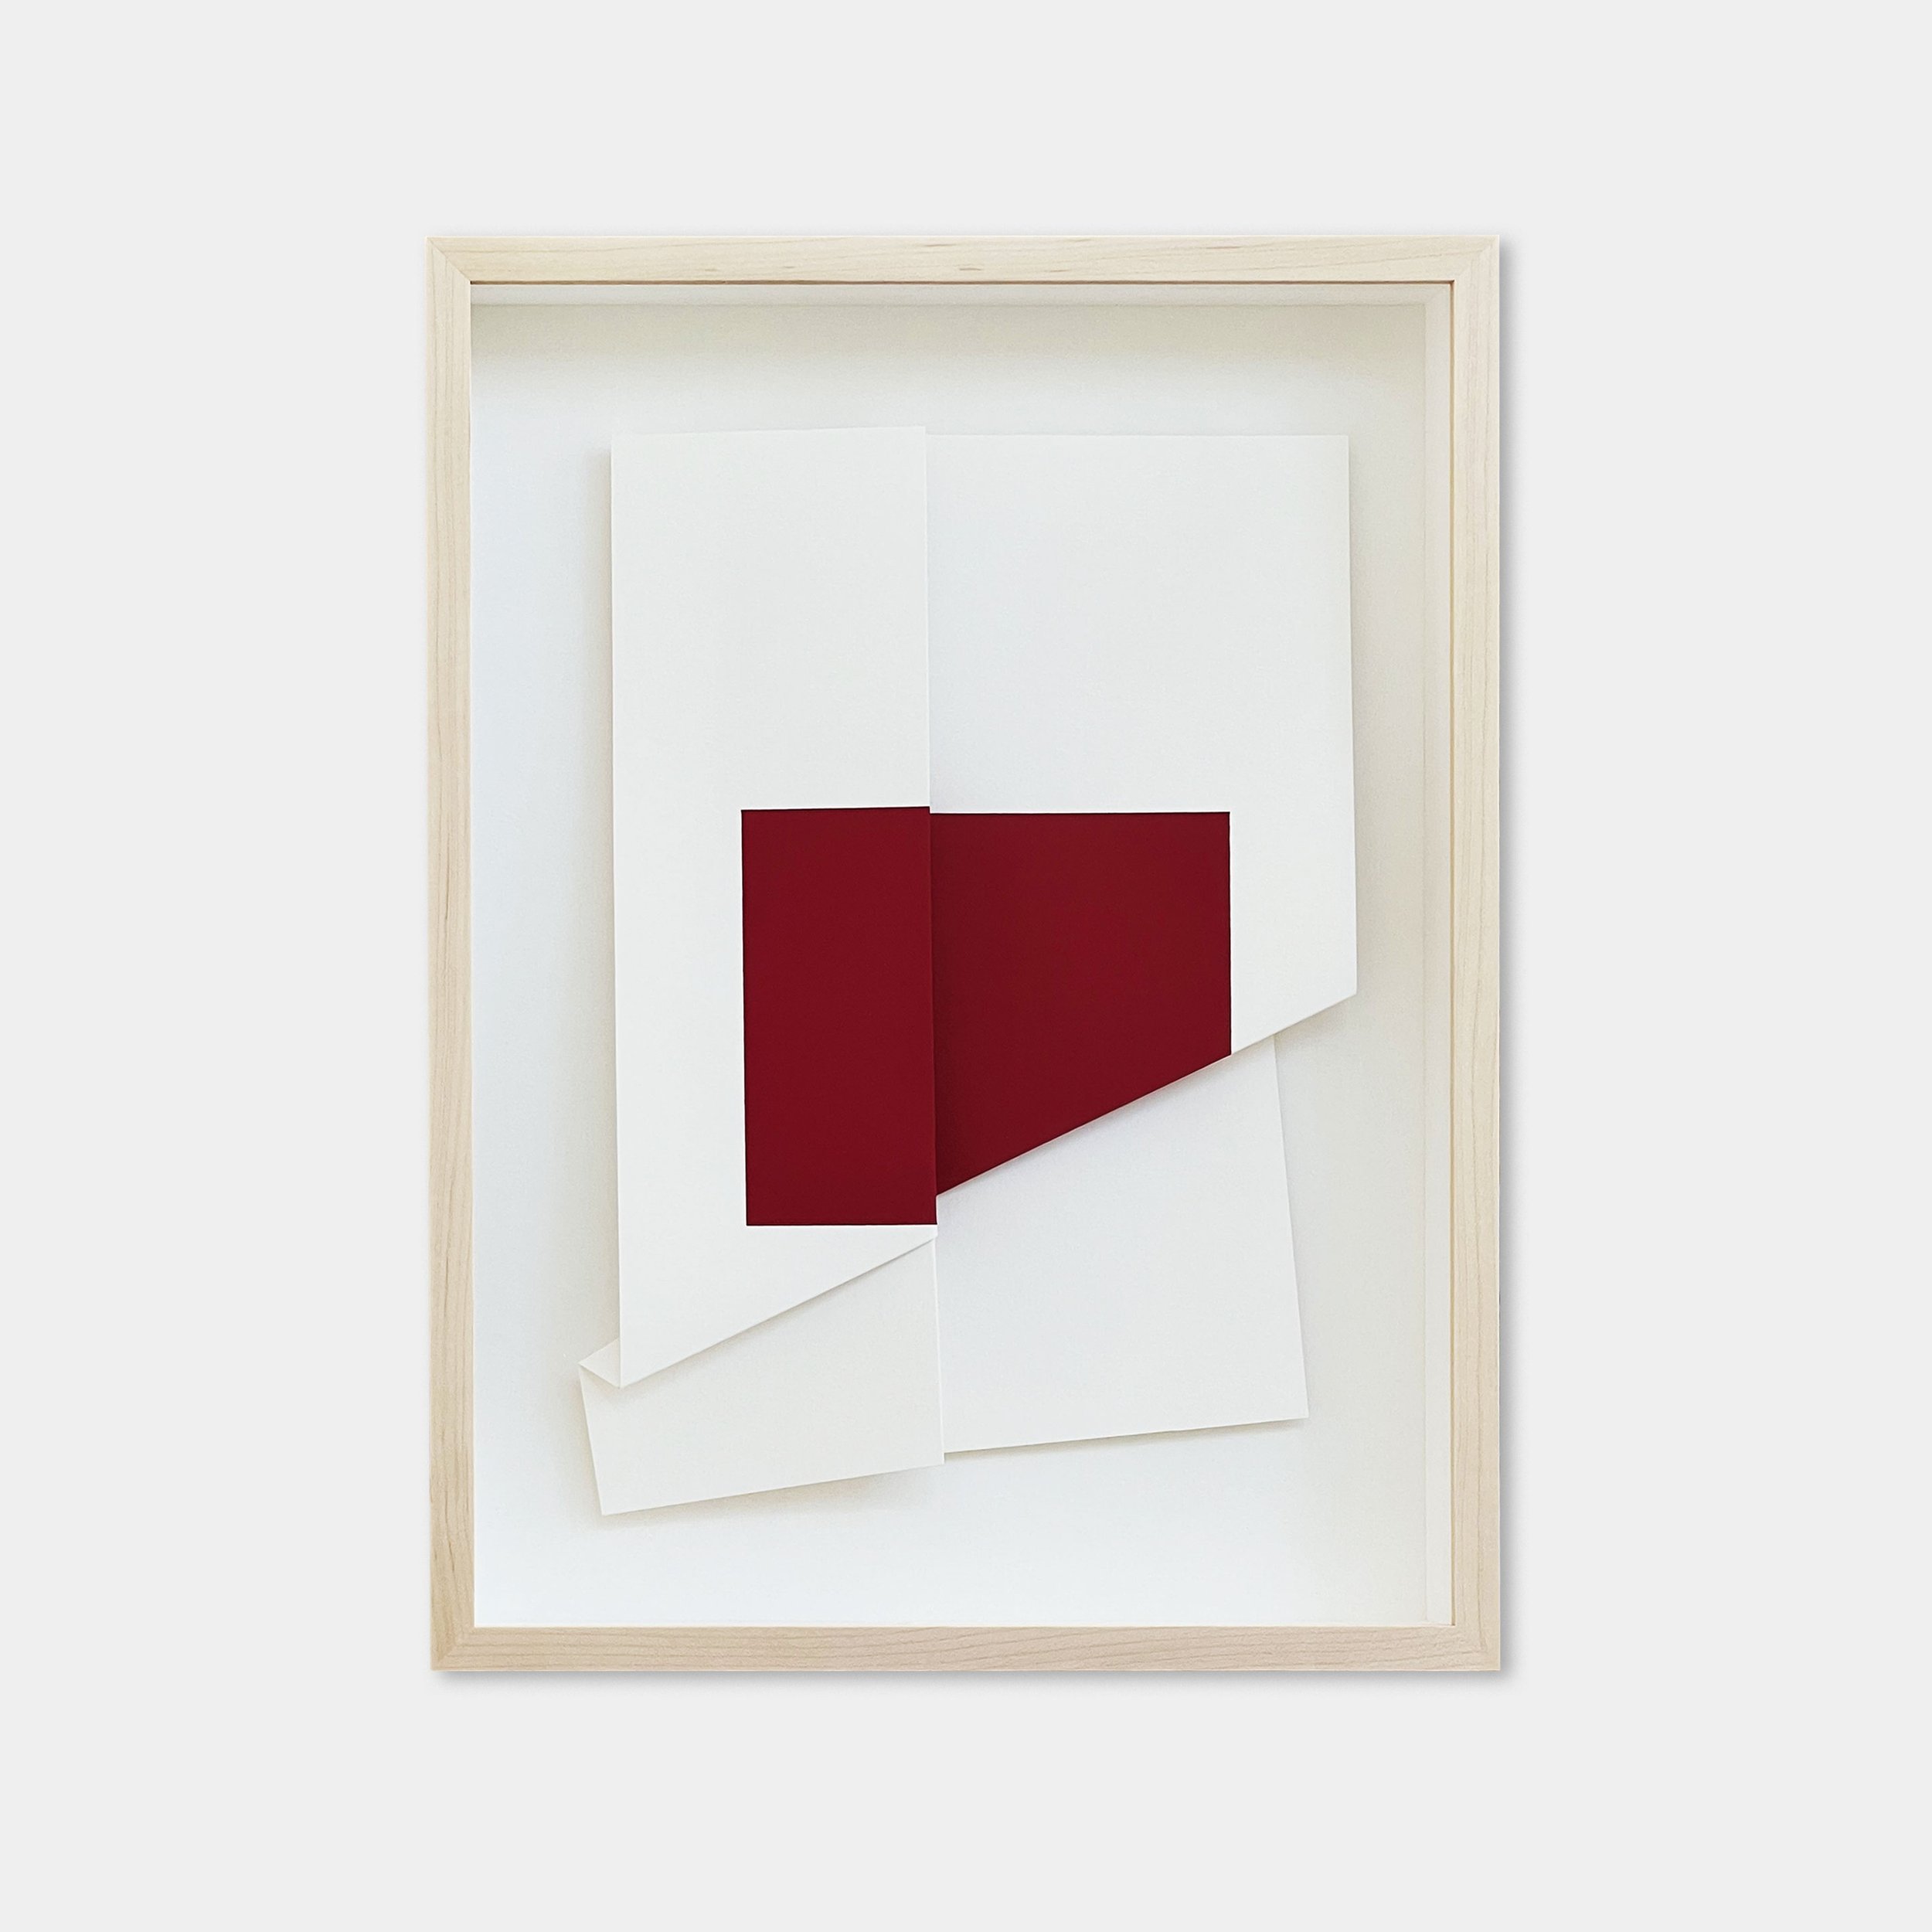  Vanha Lam    Untitled , 2022 (VL001) Gouache on archival paper in maple frame 16.75" x 12.75" x 2.5” 